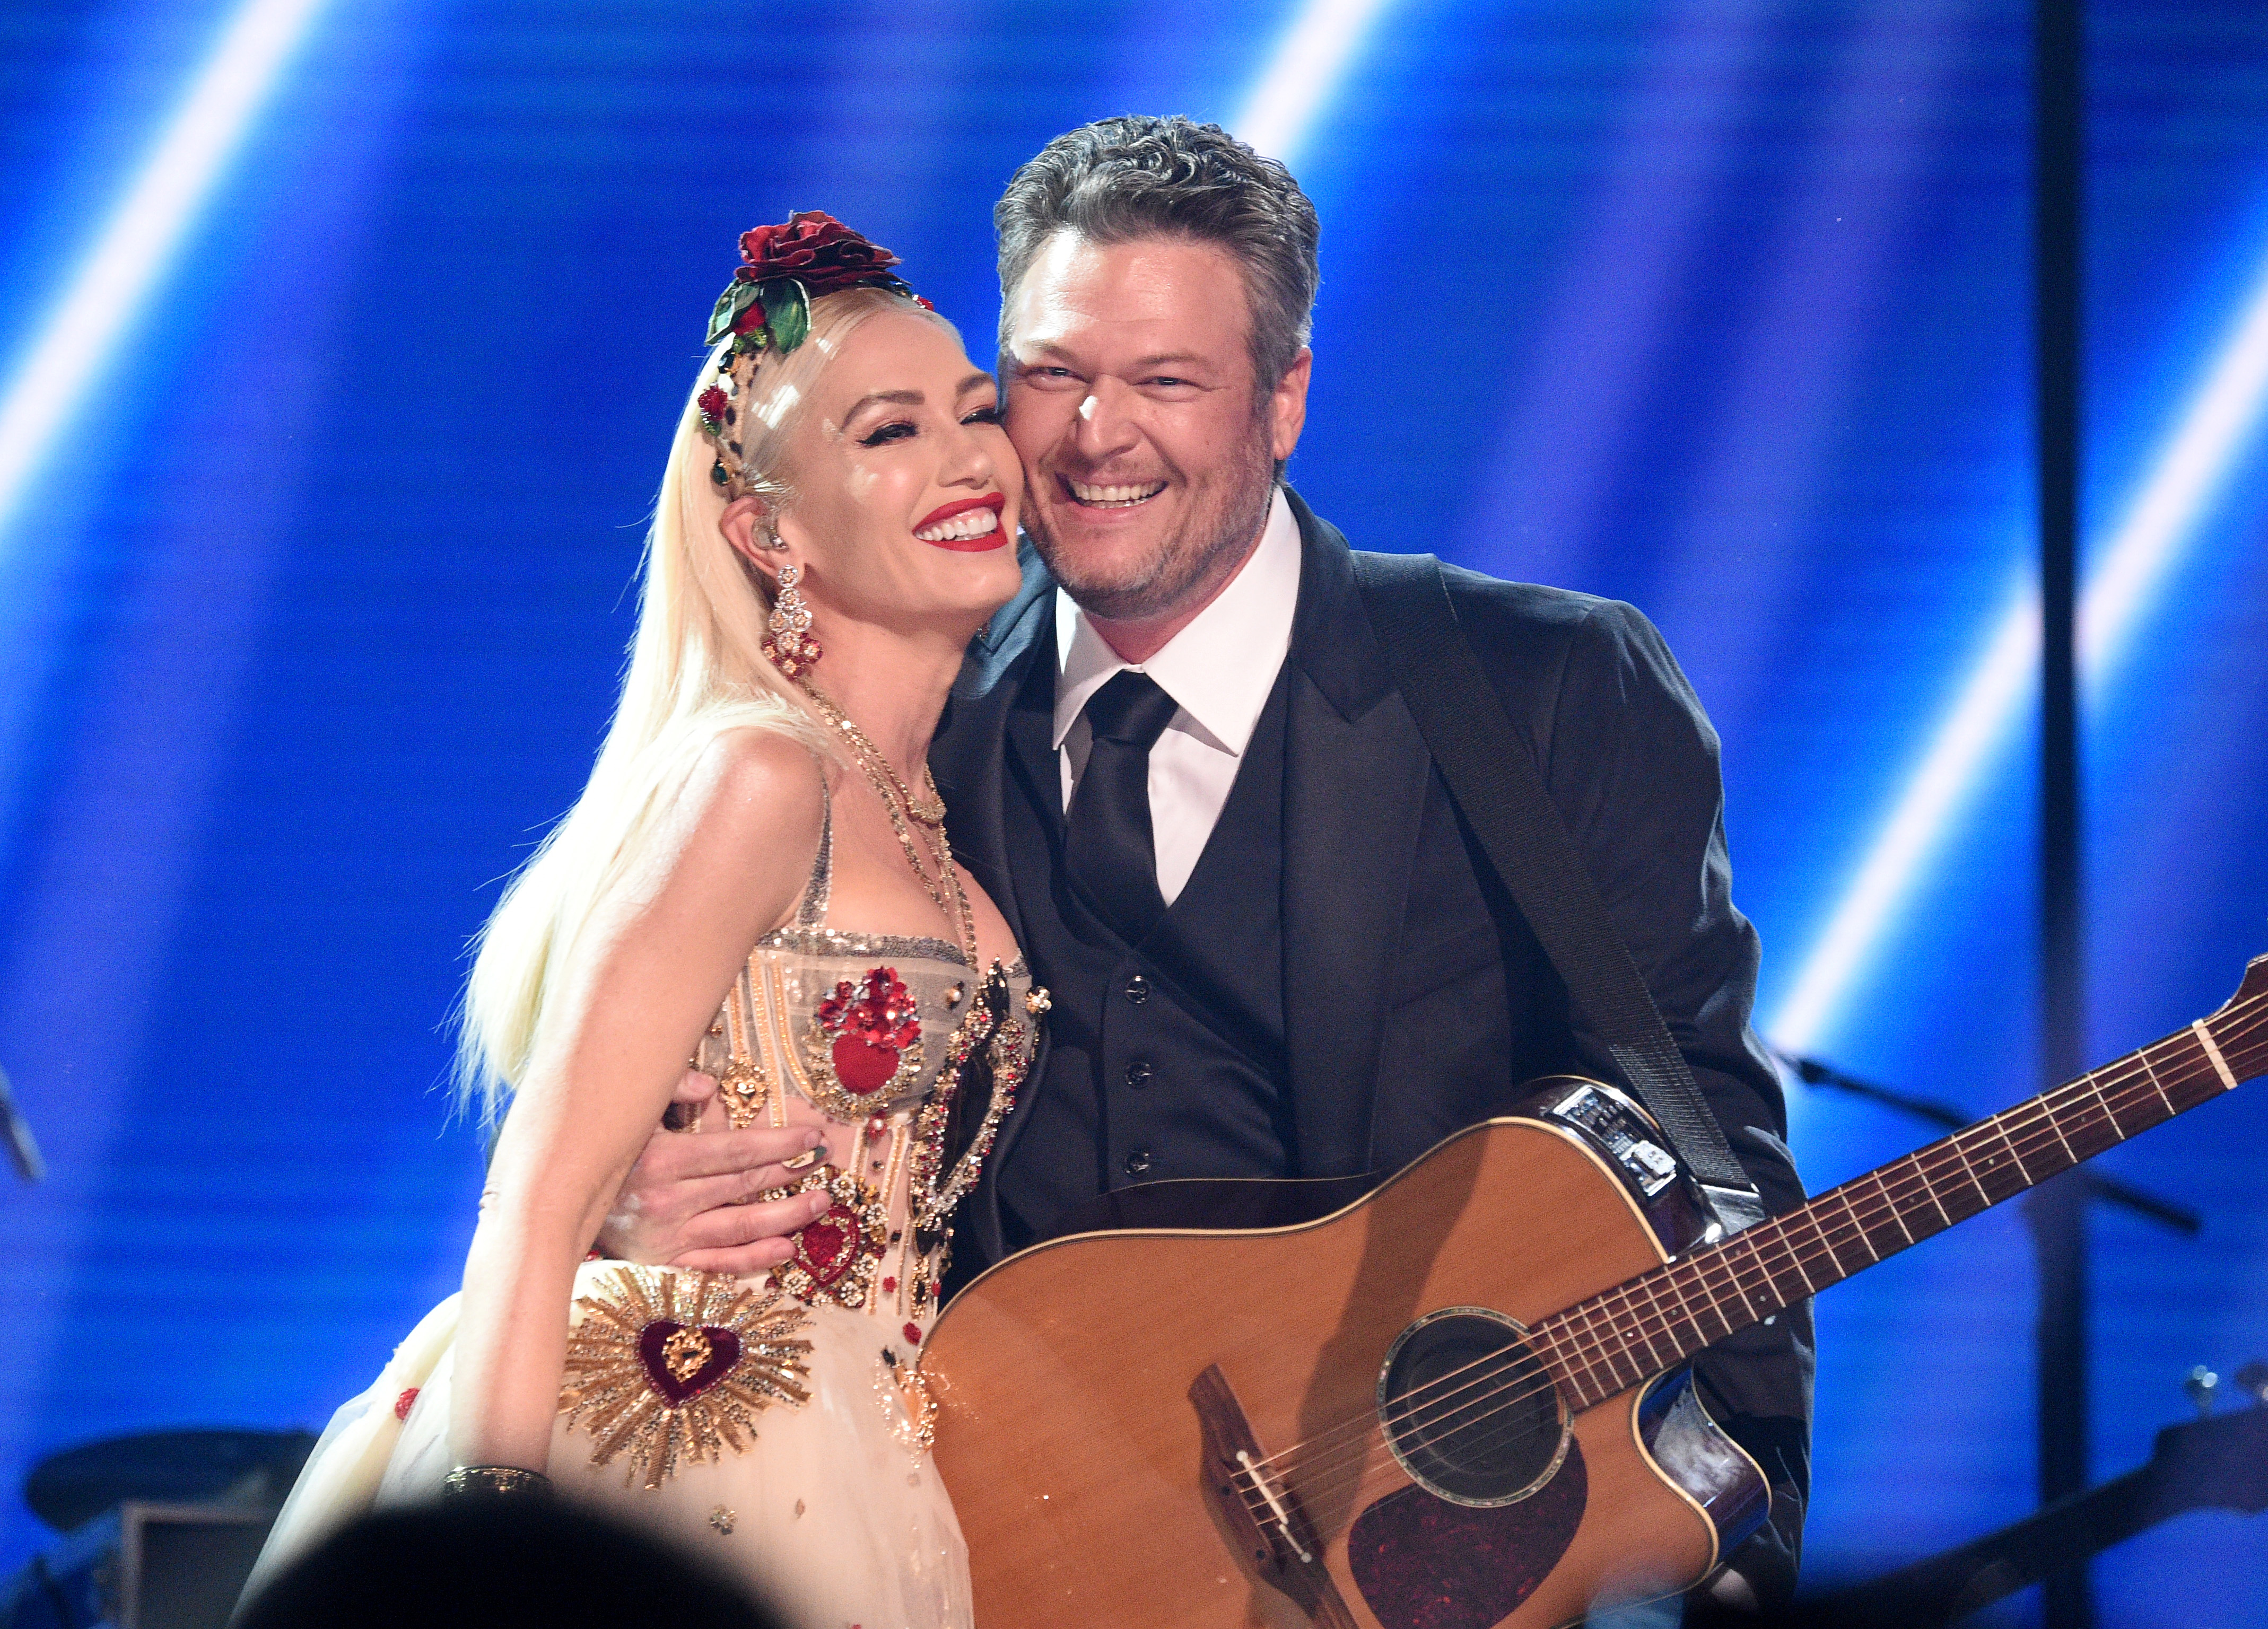 Gwen Stefani and Blake Shelton pose onstage during the 62nd Annual Grammy Awards at the Staples Center on January 26, 2020, in Los Angeles, California. | Source: Getty Images